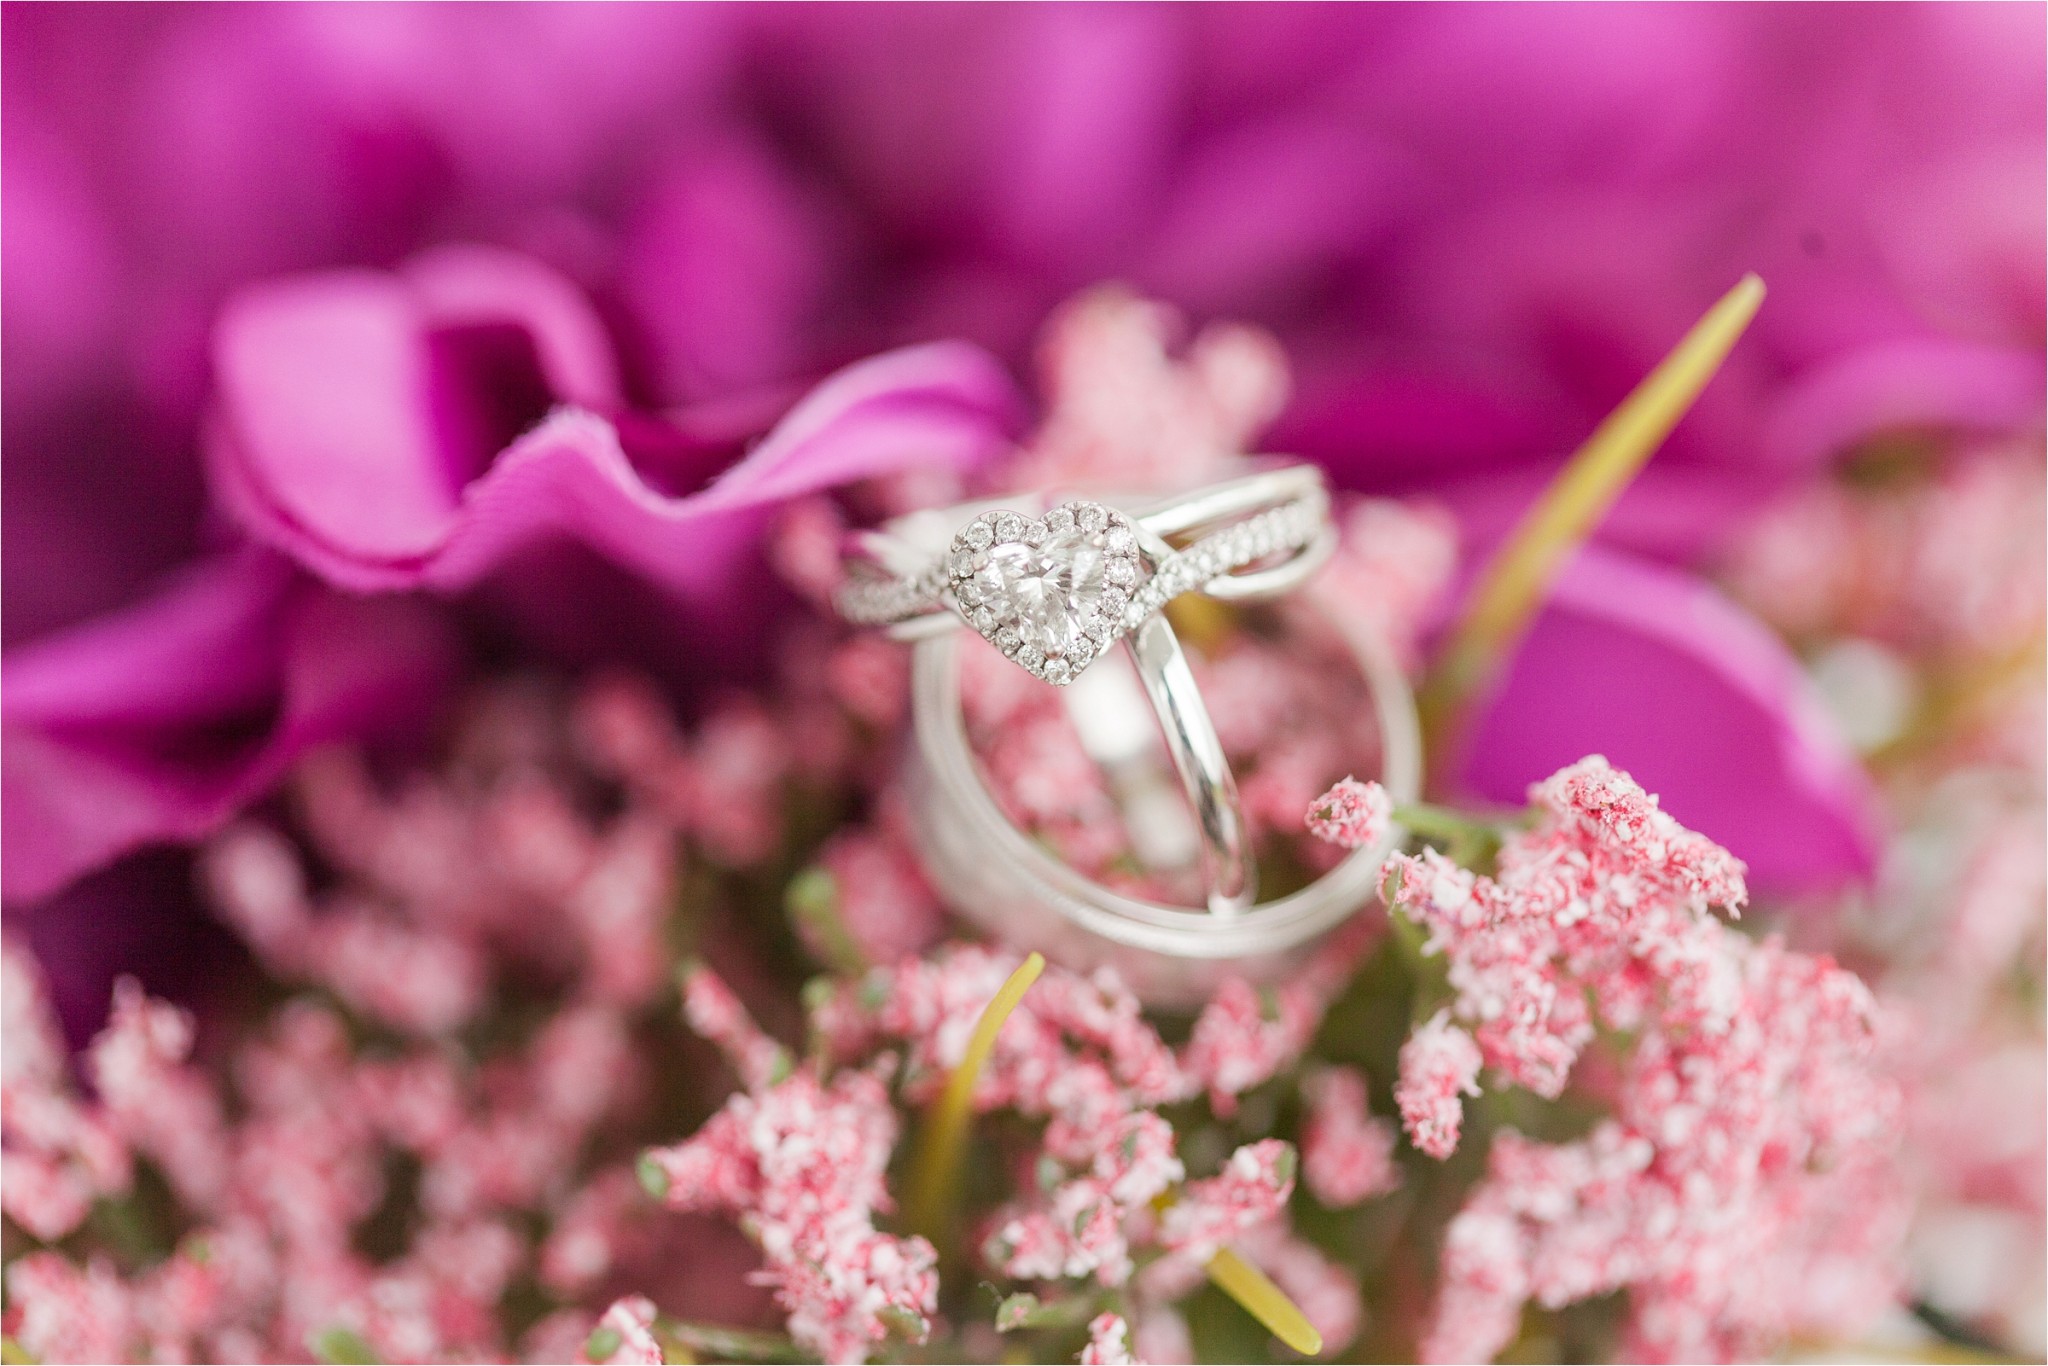 These purple flowers were the perfect backdrop for their rings!